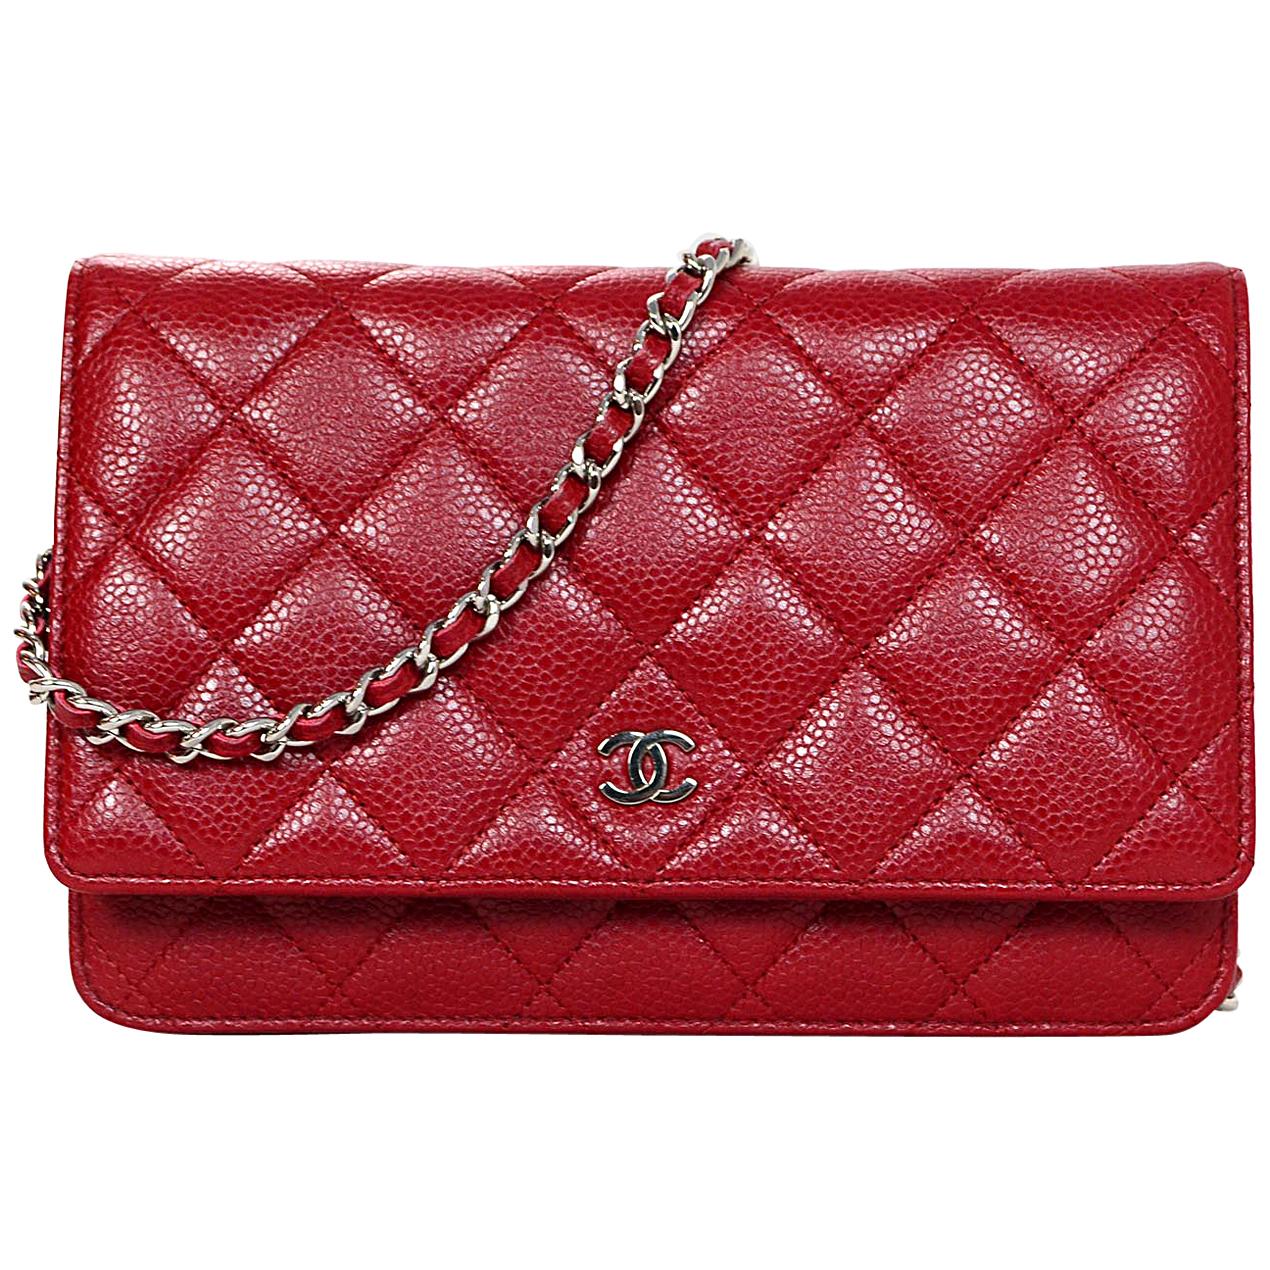 Chanel Red Caviar Leather WOC Wallet On Chain Crossbody Bag w/ Dust Bag